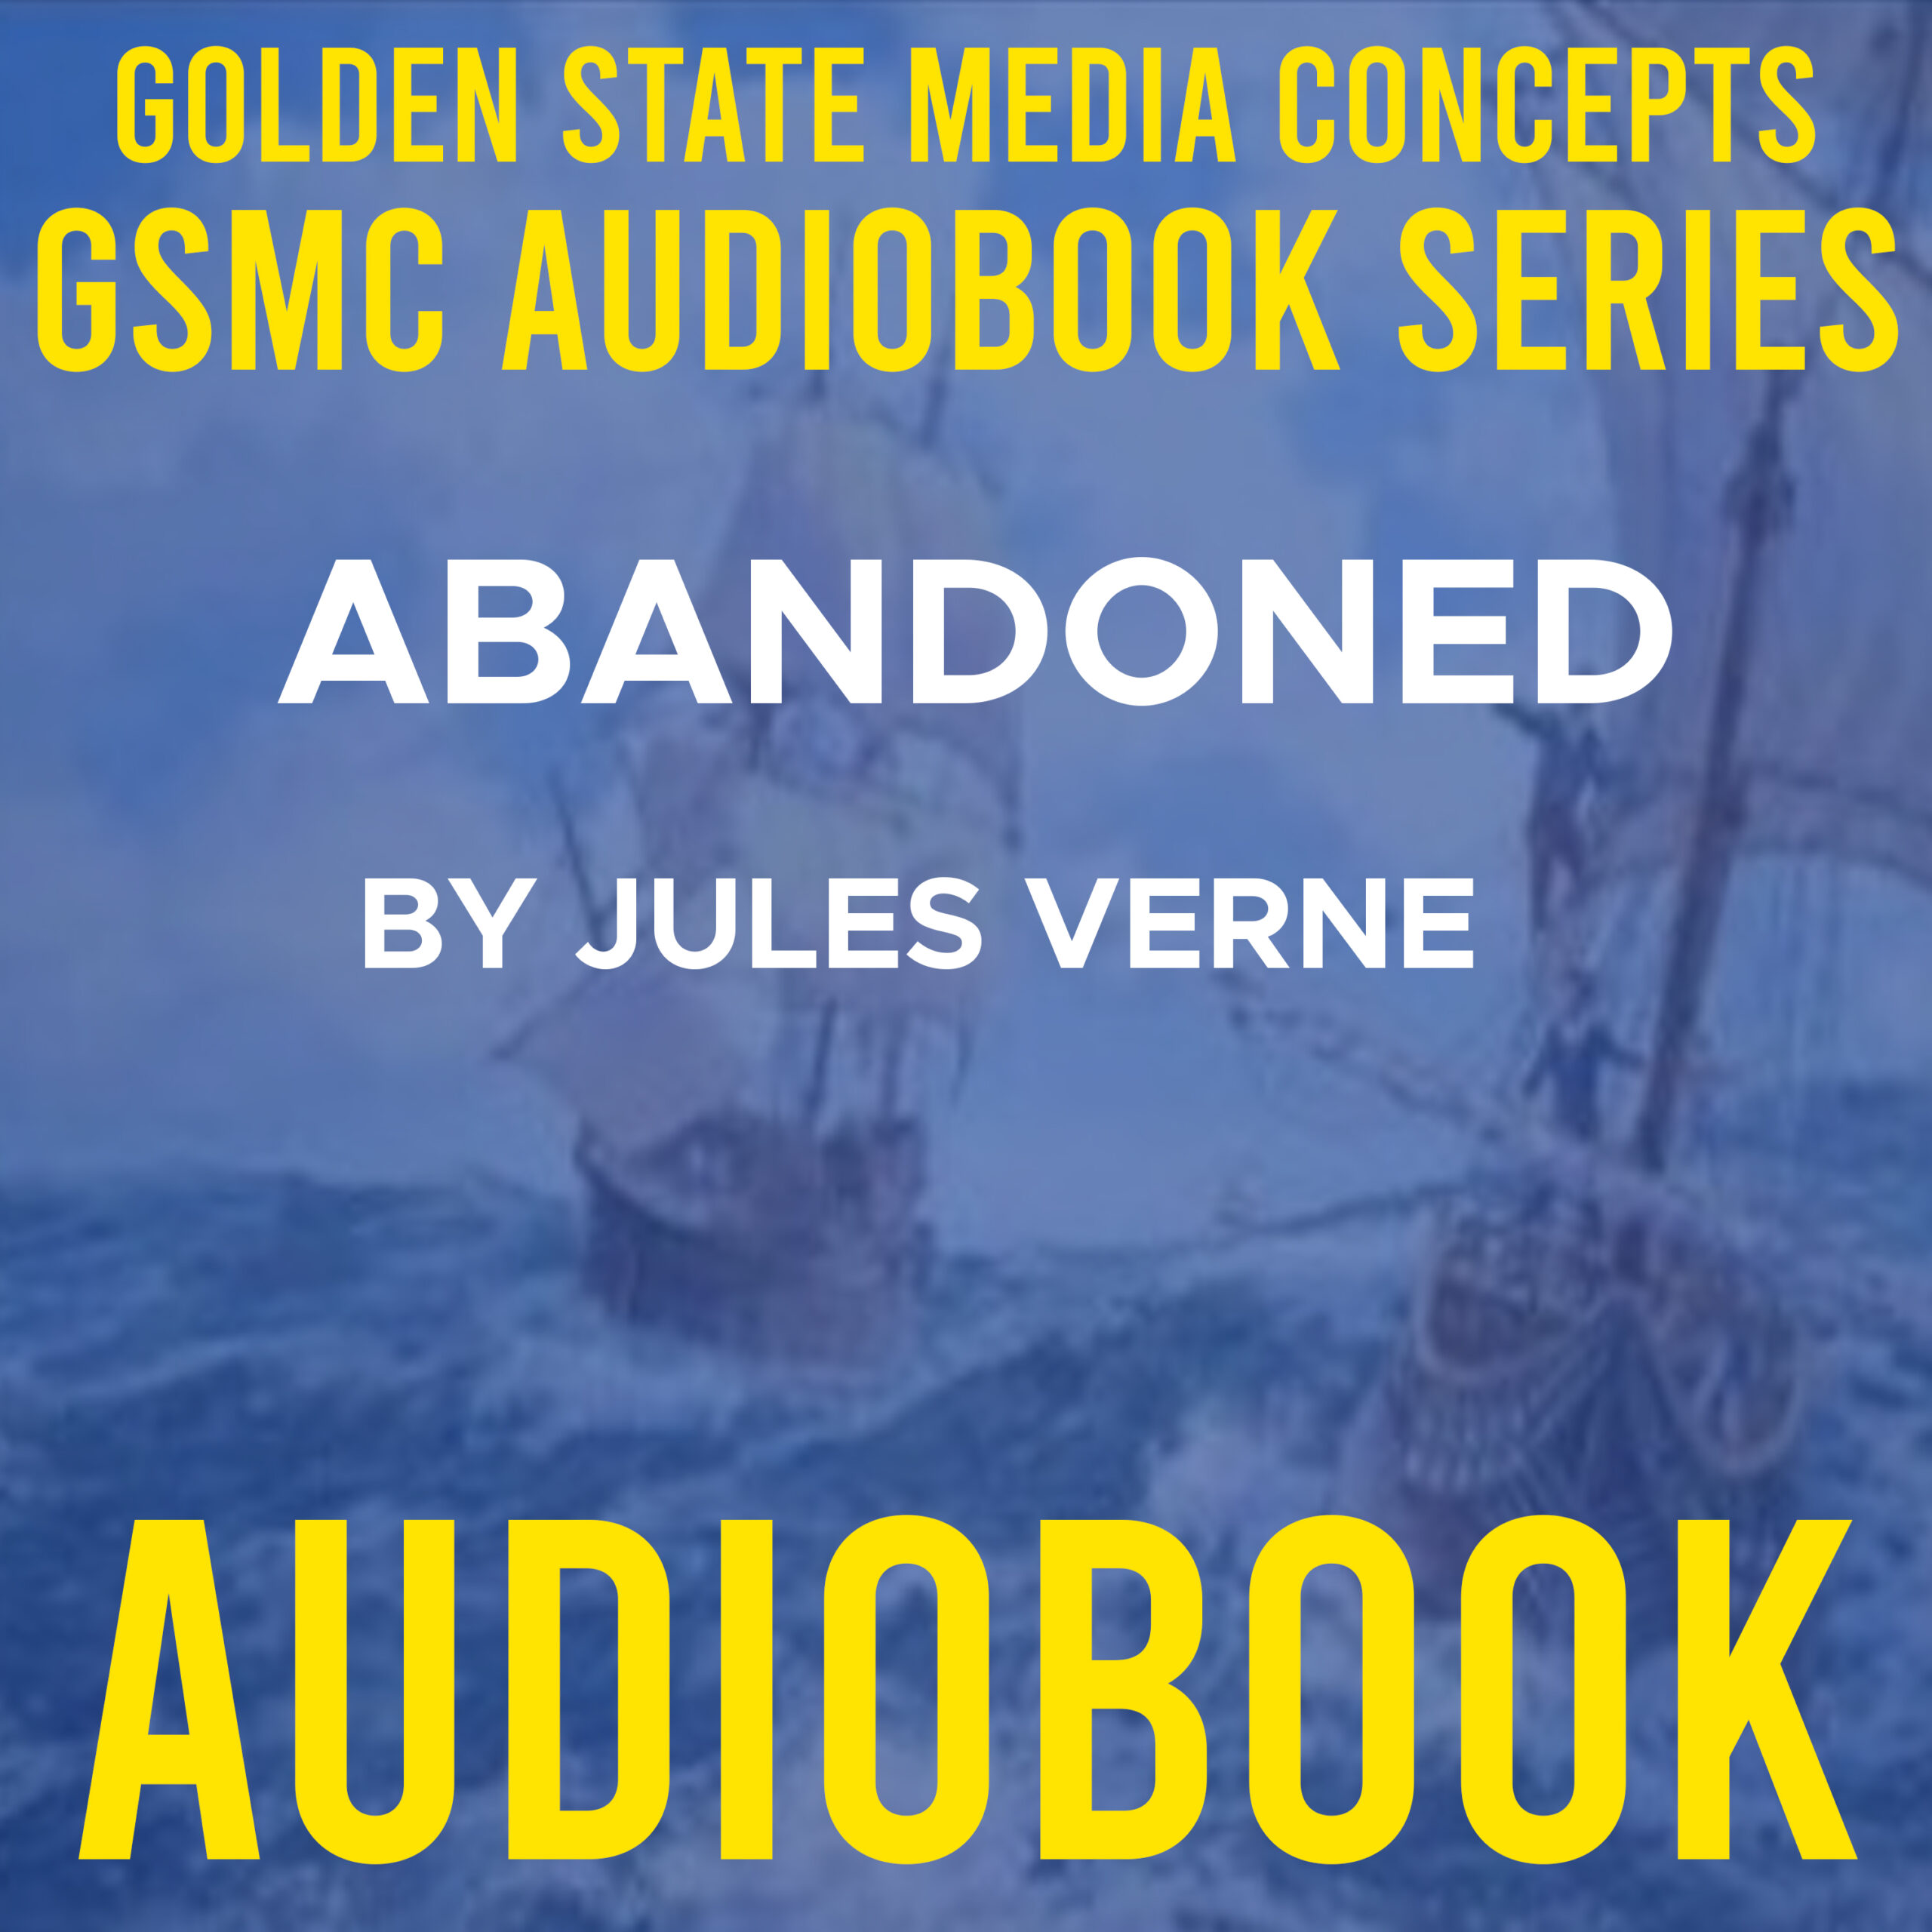 GSMC Audiobook Series: Abandoned by Jules Verne